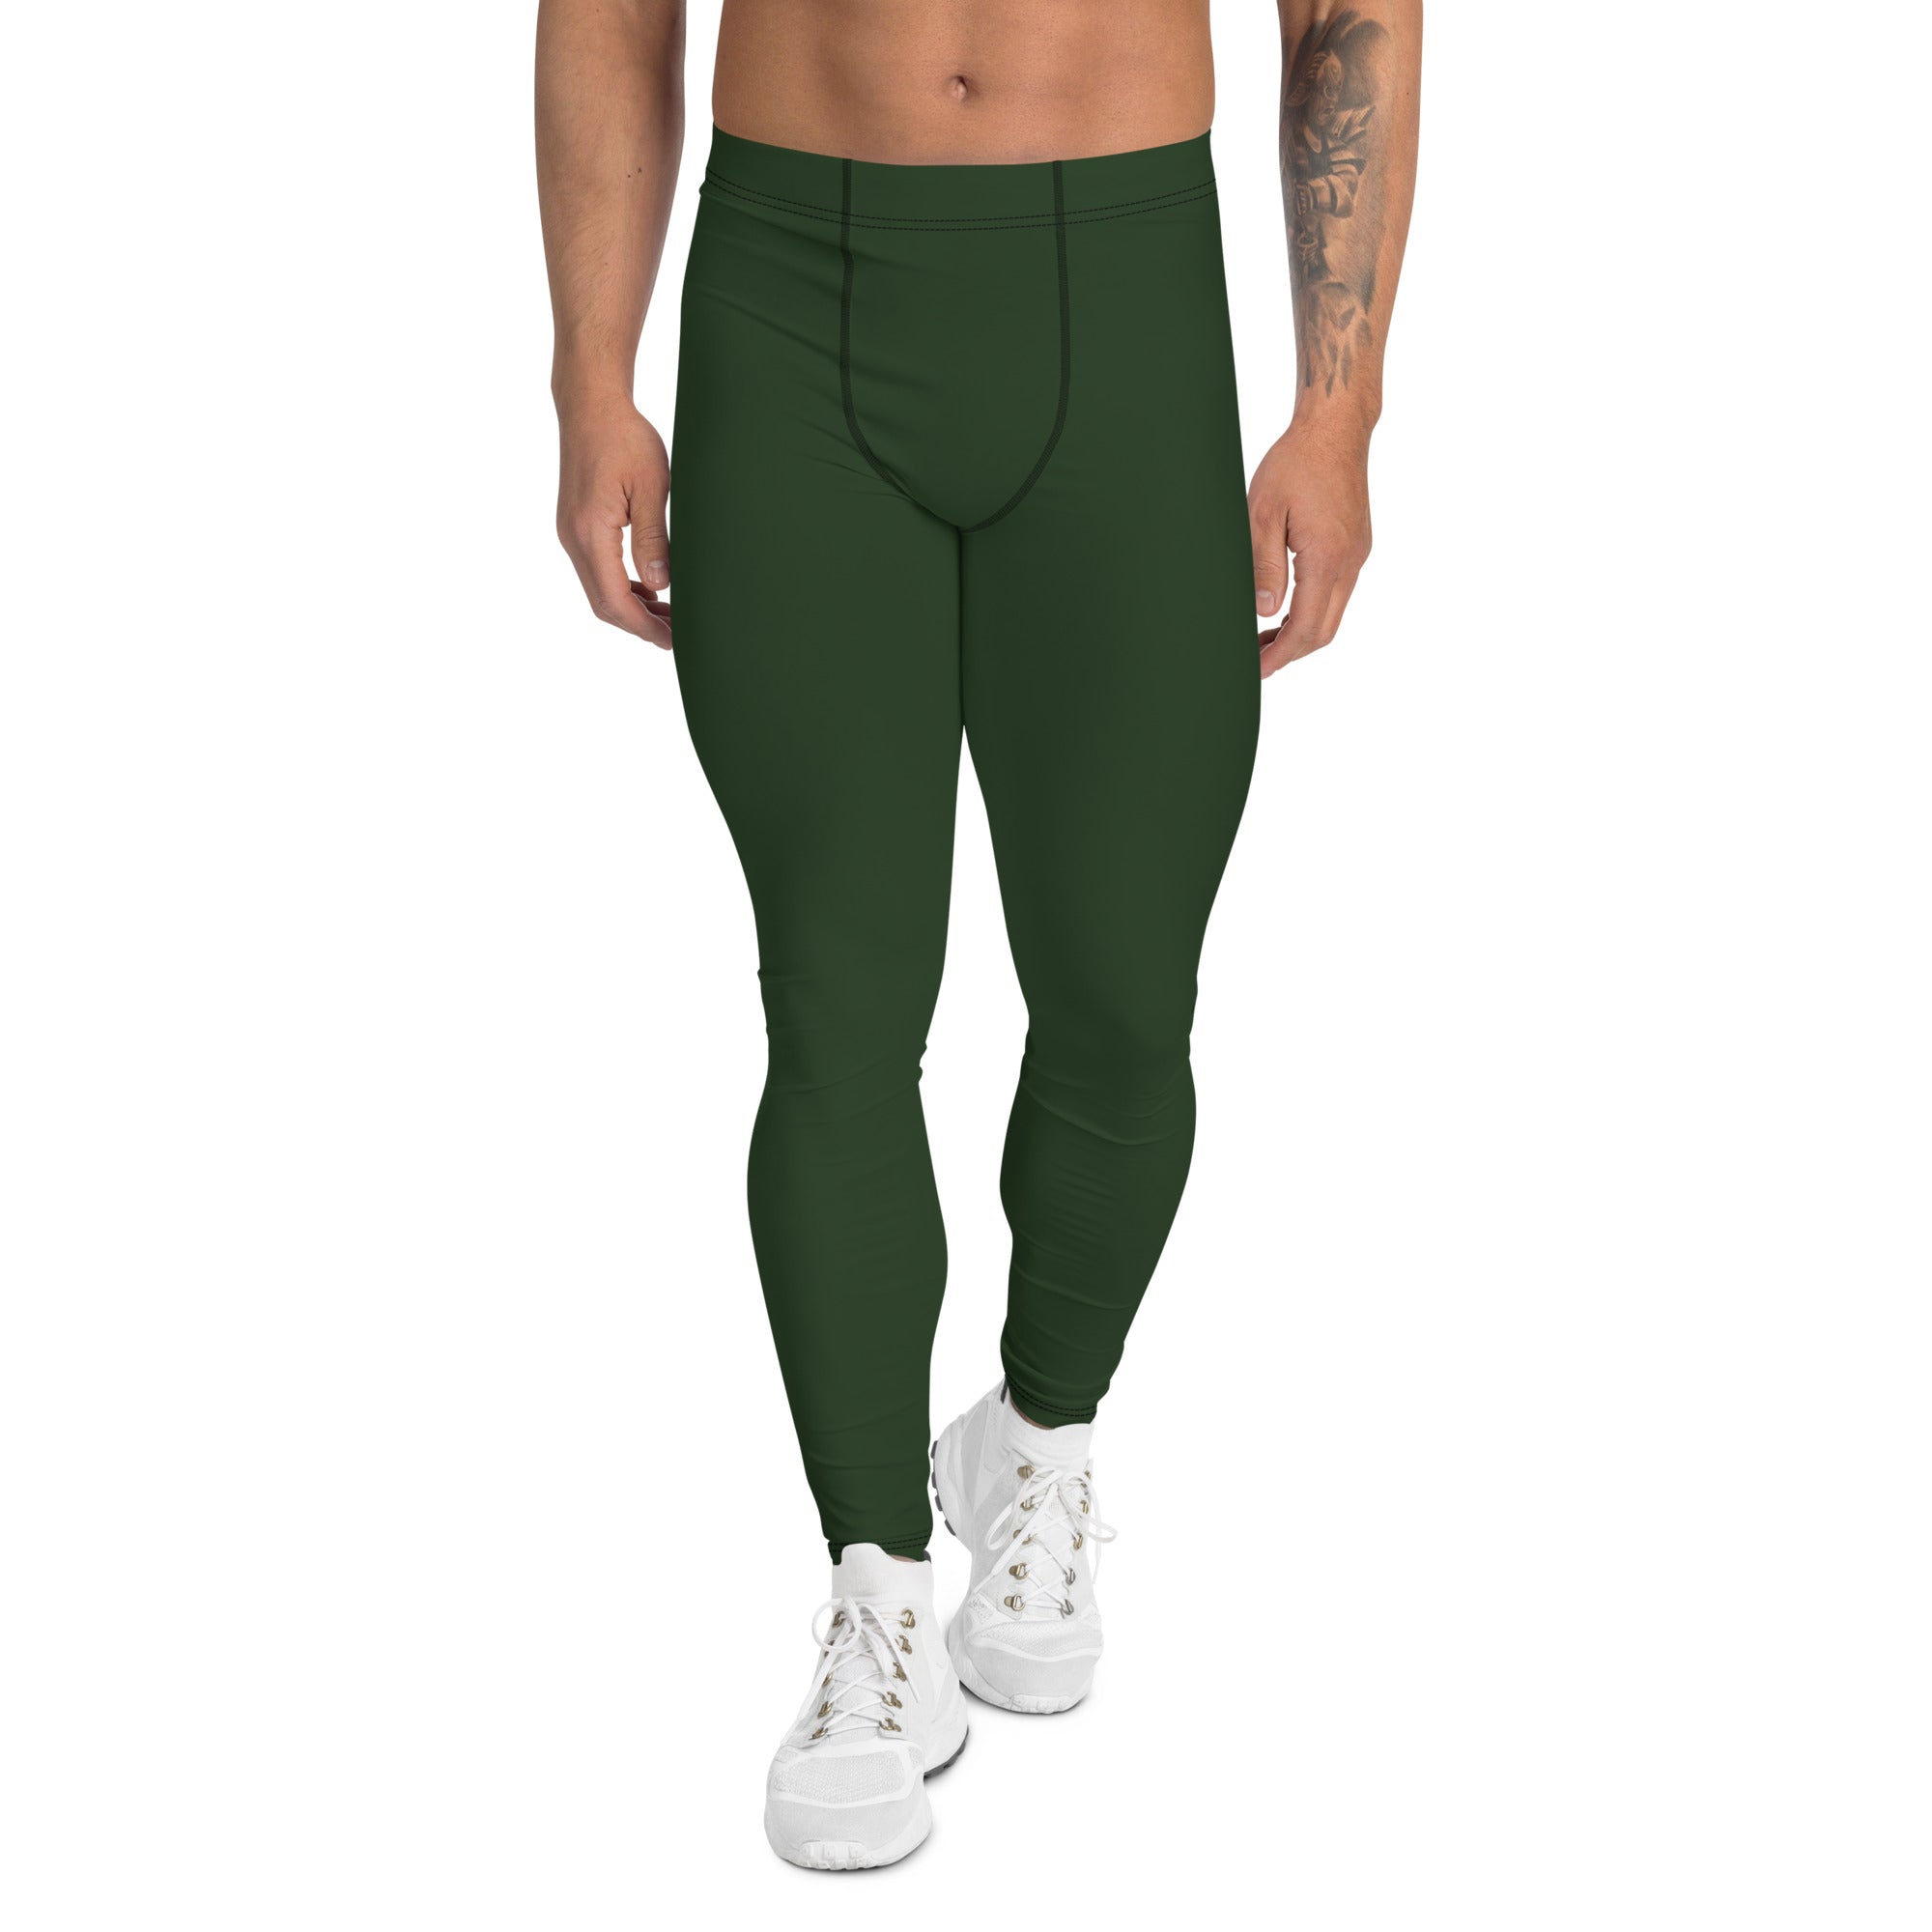 Forest Green Solid Men's Leggings, Dark Pine Tree Green Solid Color Best Modern Sexy Meggings Men's Workout Gym Sports Running Tights Leggings, Men's Compression Tights Pants - Made in USA/ EU/MX (US Size: XS-3XL)